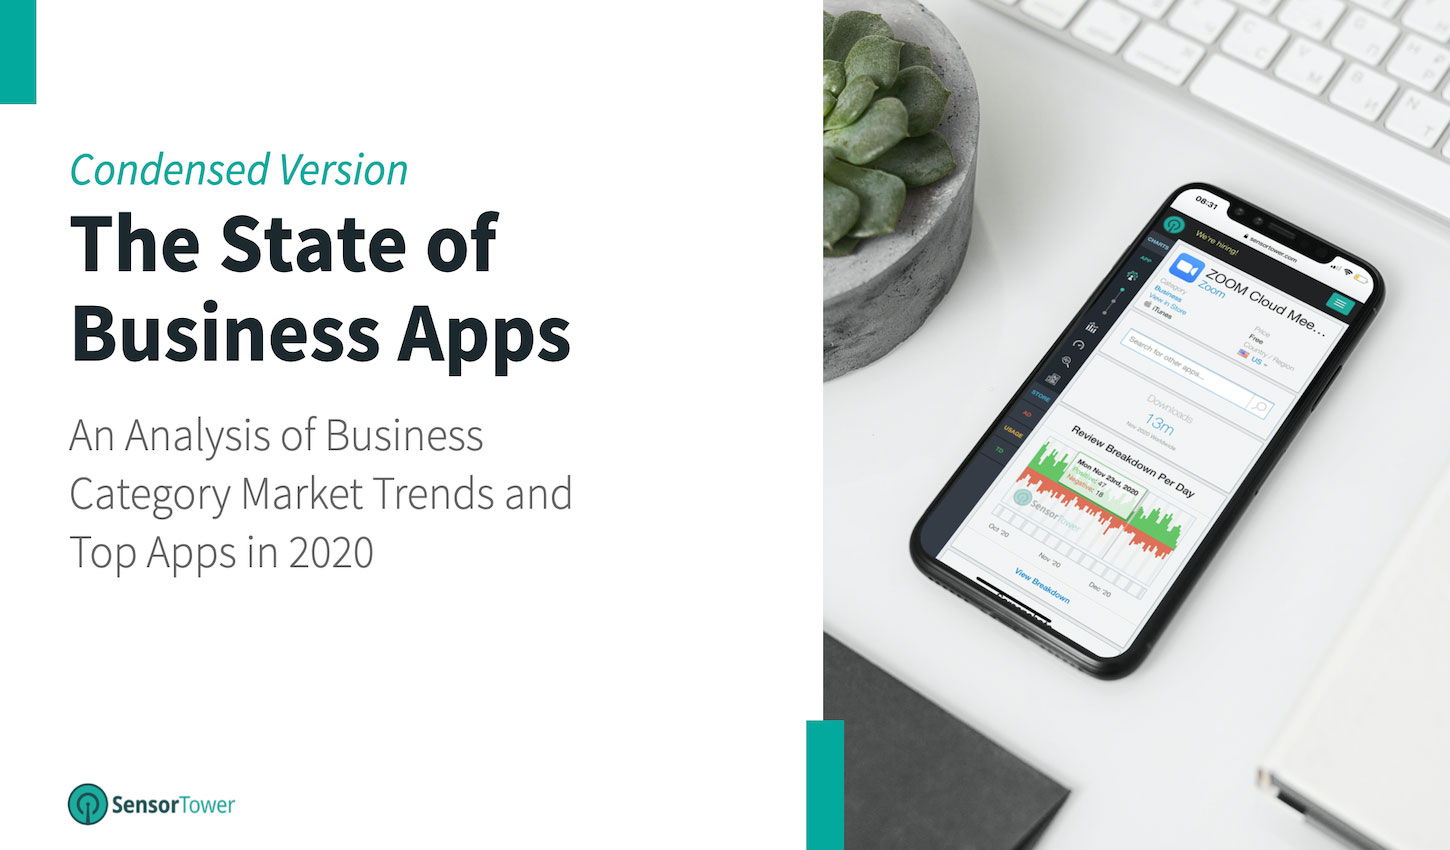 Sensor Tower's latest report shows how COVID-19 has affected Business category apps.